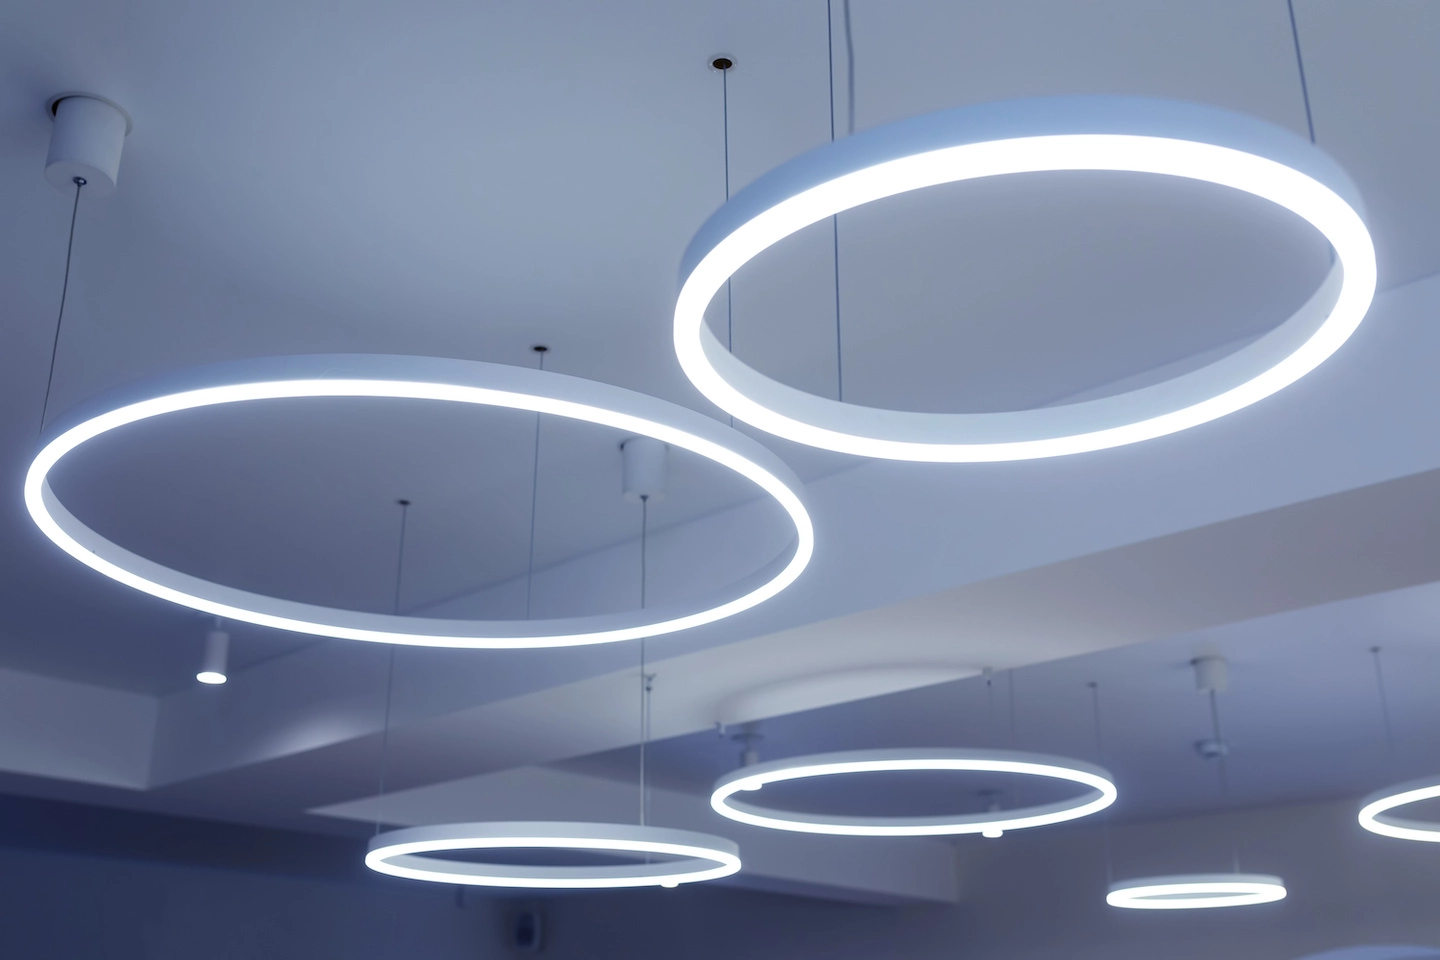 Circular LED lighting hanging from the ceiling.